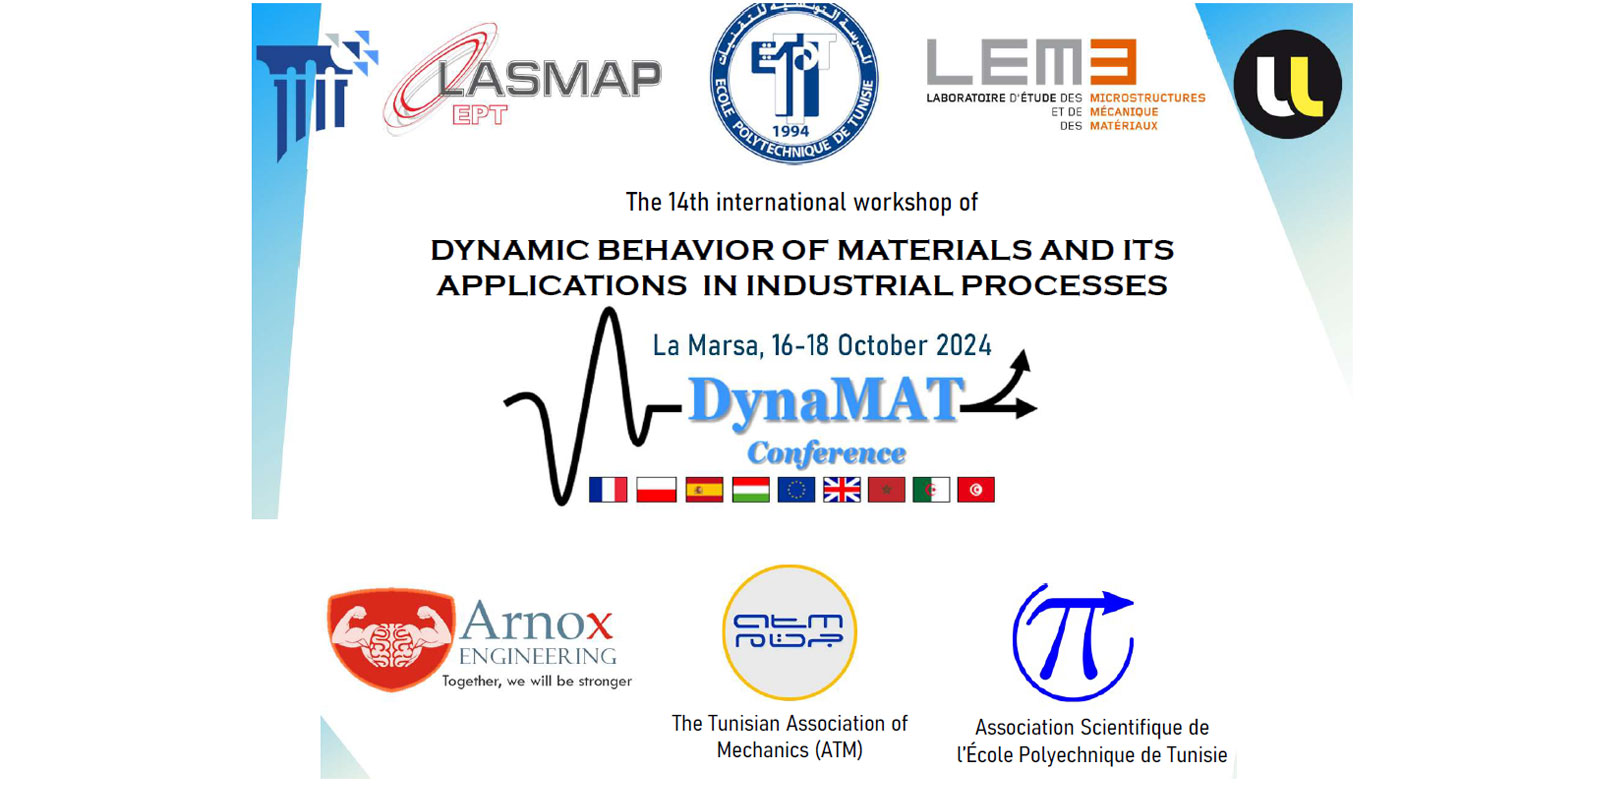 DYNAMIC BEHAVIOR OF MATERIALS AND ITS APPLICATIONS IN INDUSTRIAL PROCESSES